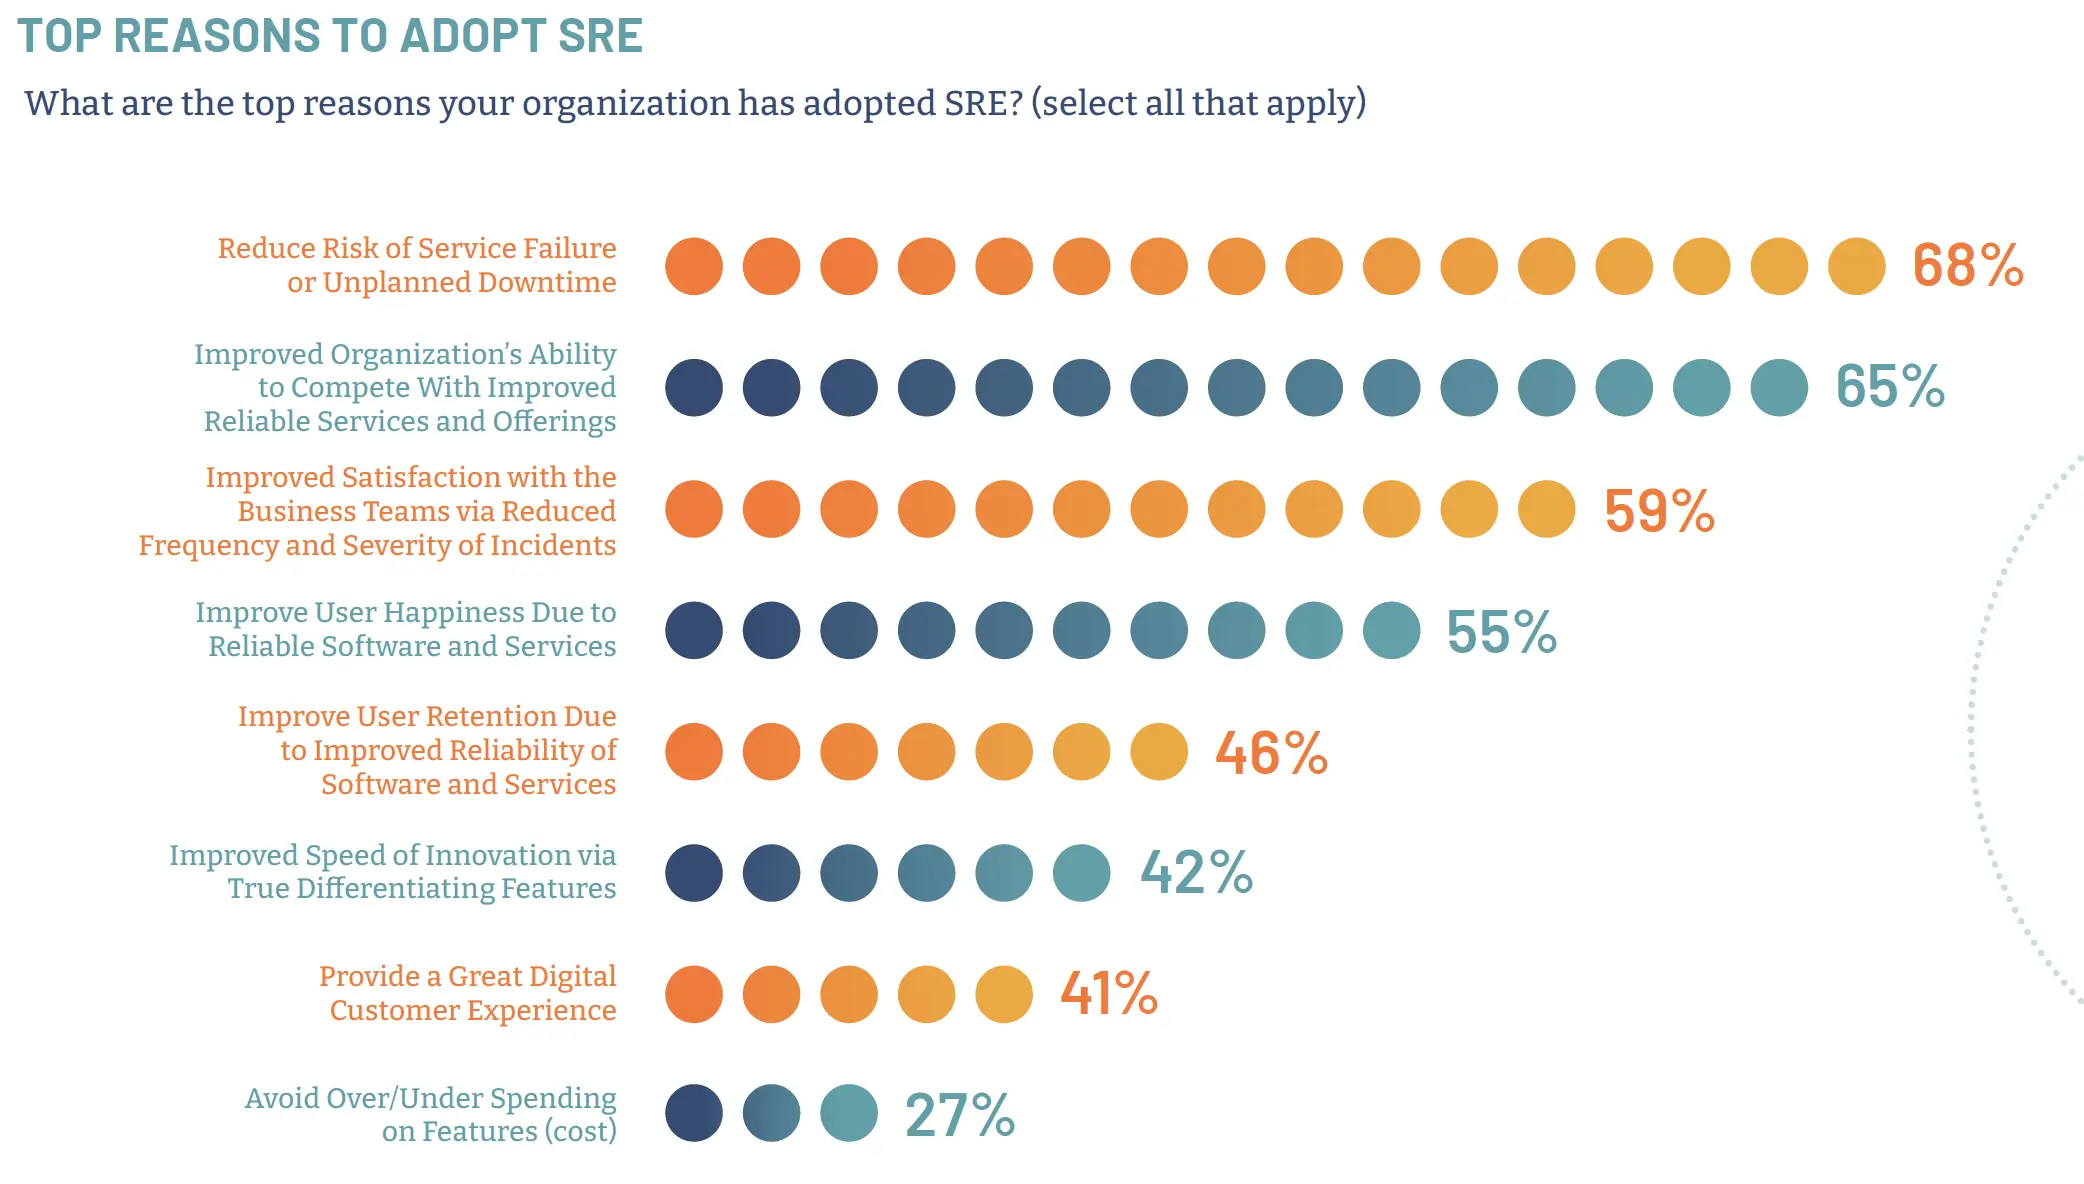 Top reasons to adopt SRE